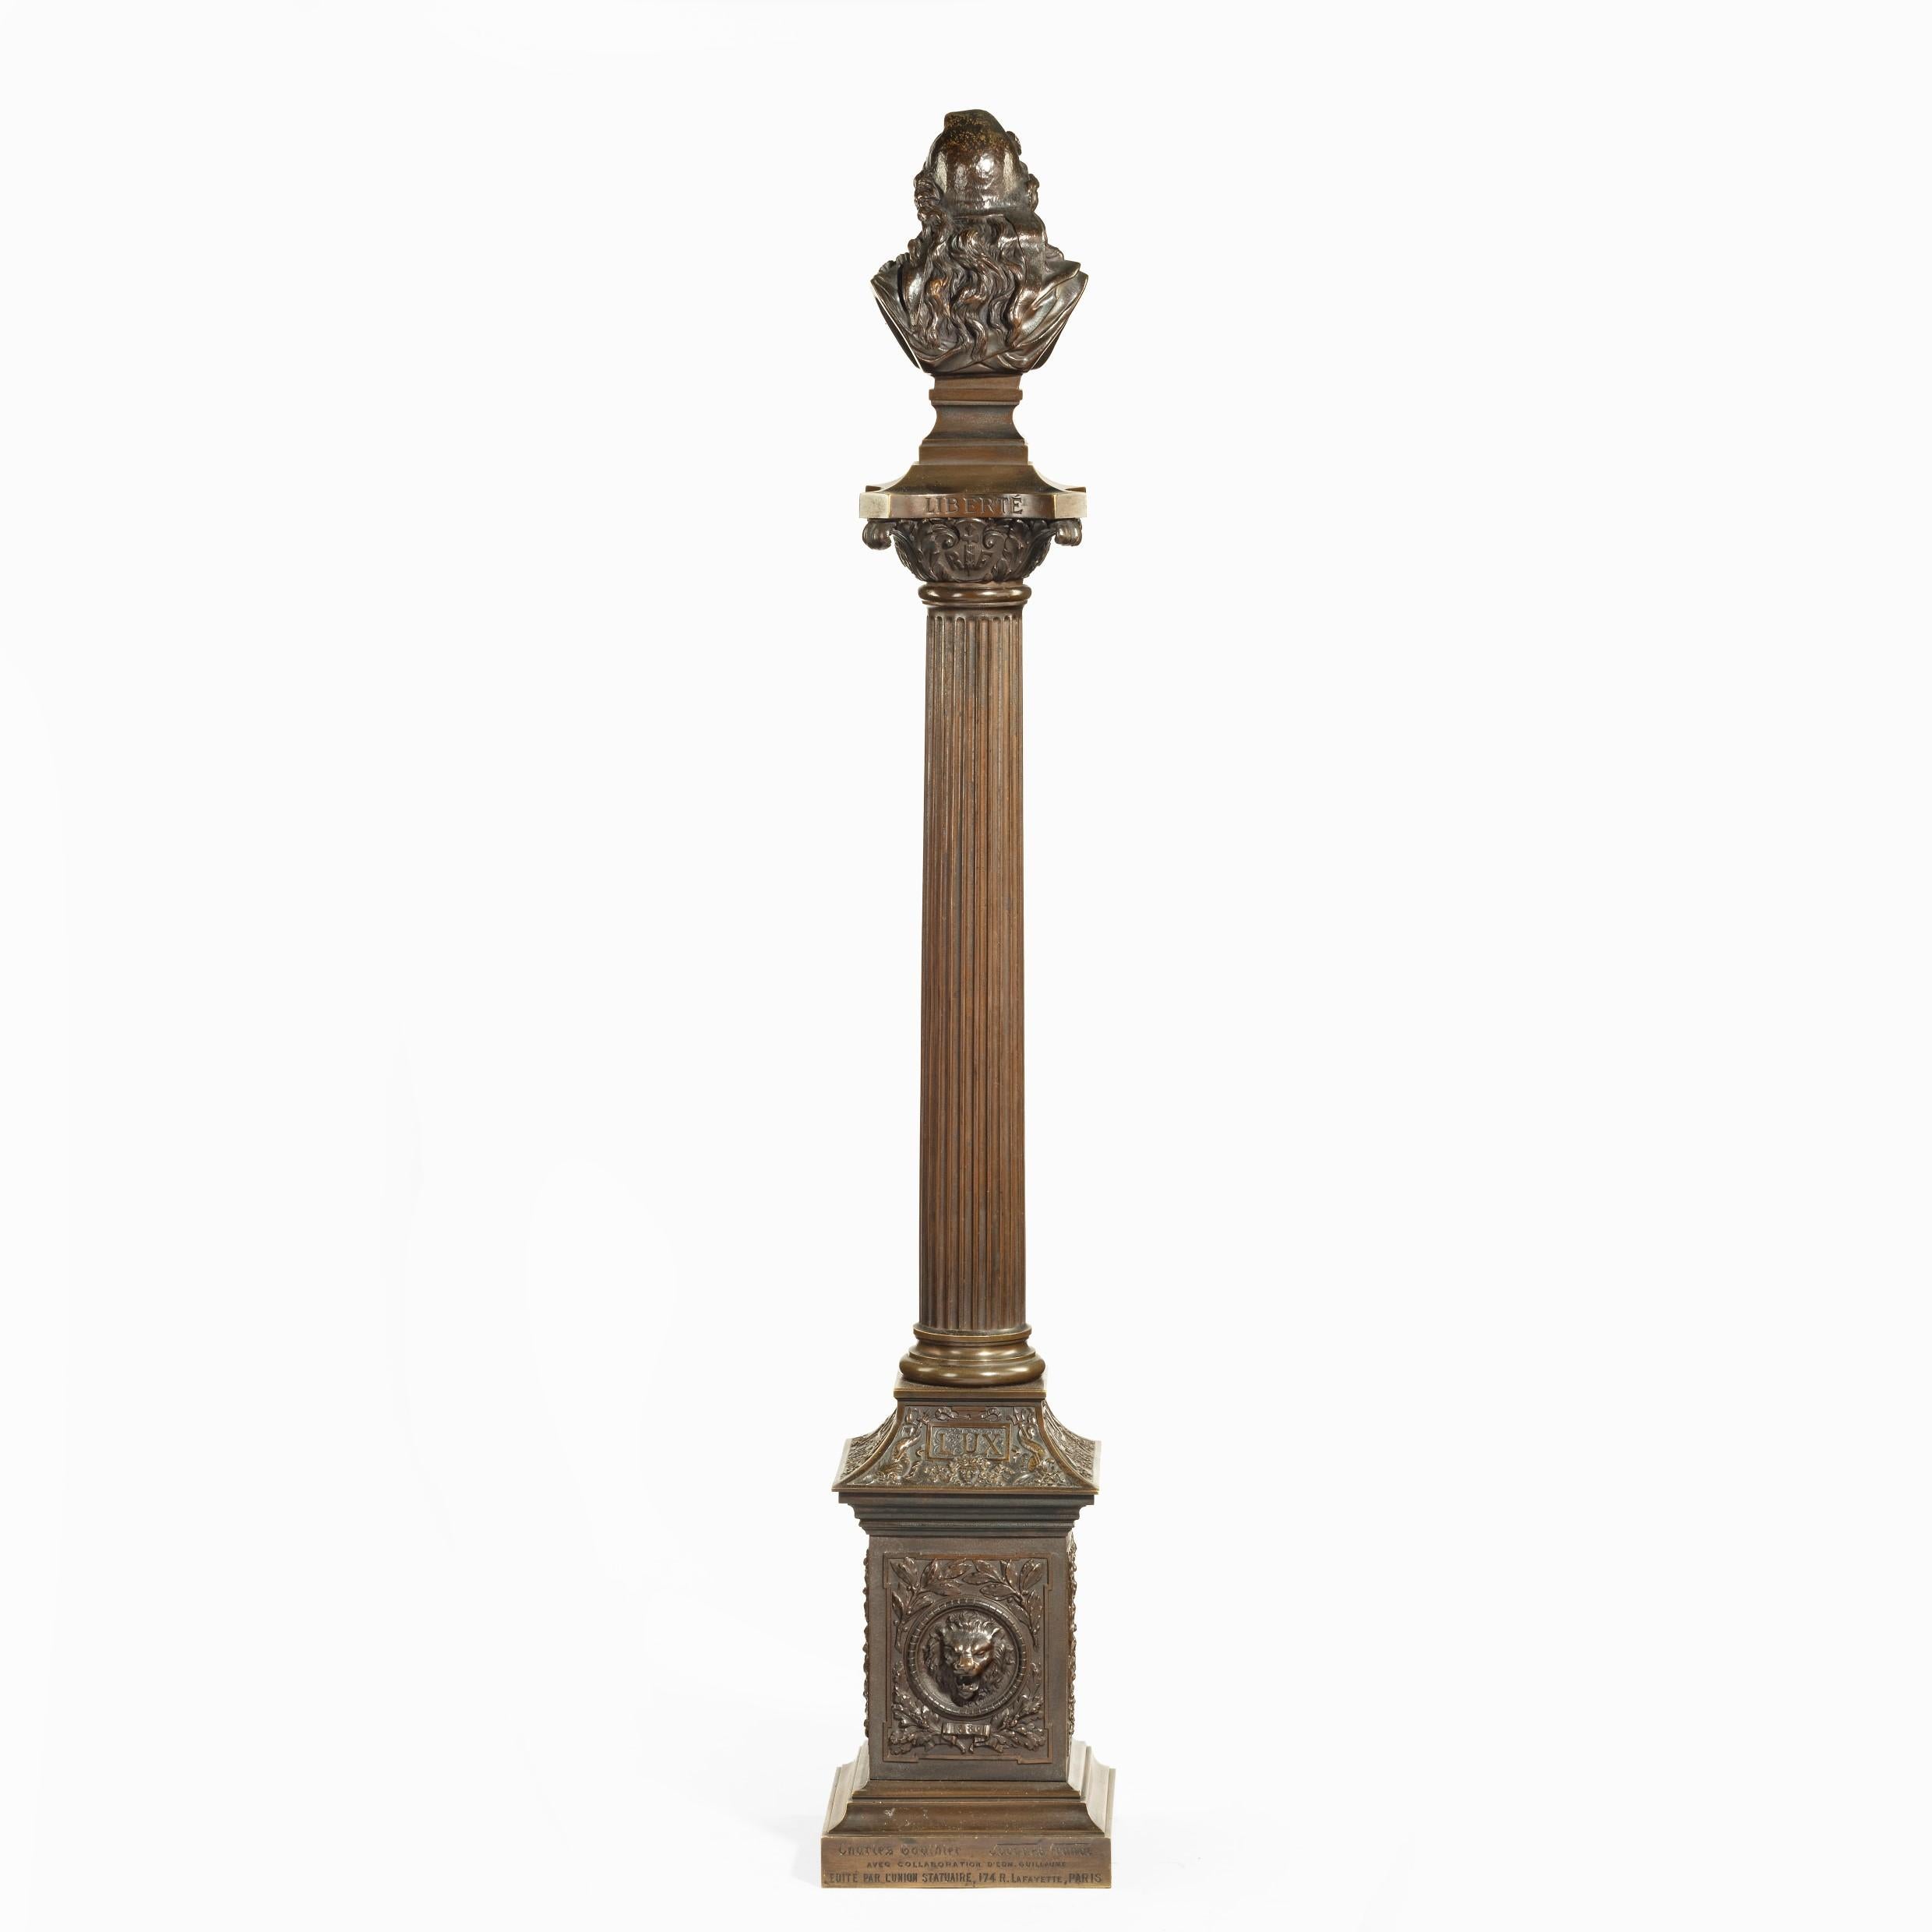 A bronze column depicting ‘La Colonne de la Republique’ dated 1889, after Paul LeCreux, the classical fluted column is surmounted by a bust of Marianne, one of the most prominent symbols of the French Republic, wearing a Phrygian cap, the sides